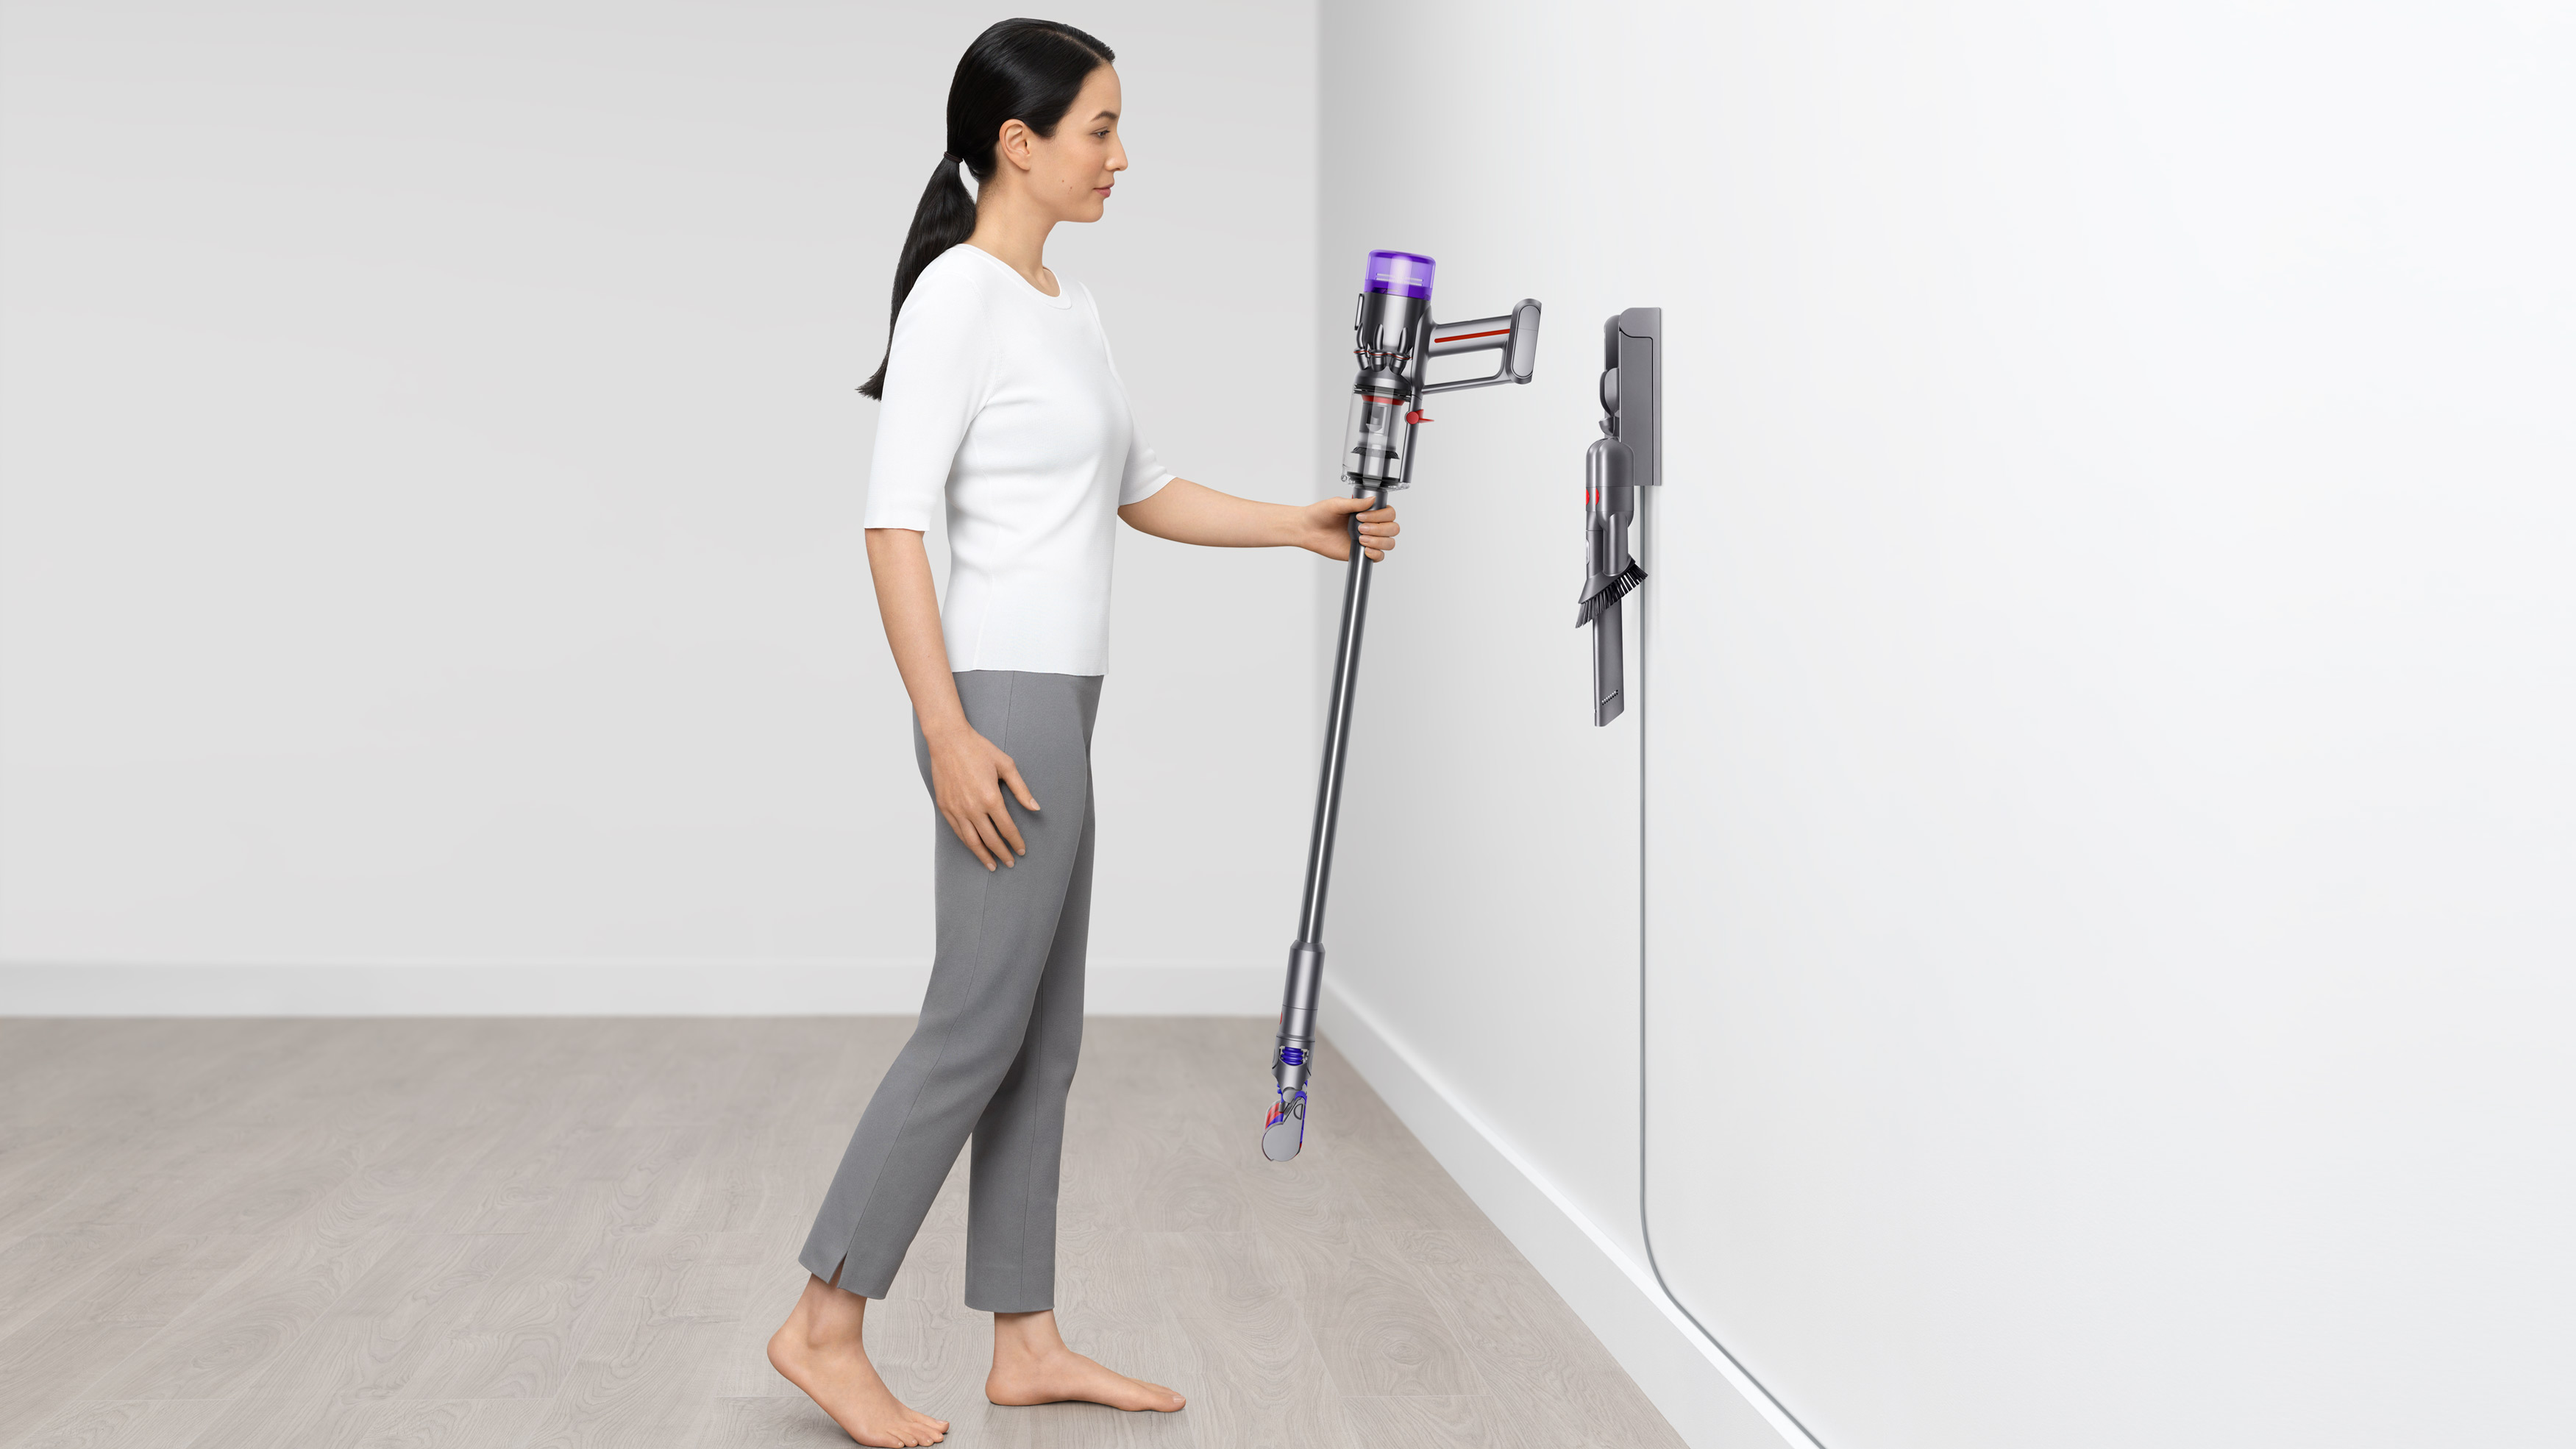 Dyson Micro 1.5kg being hung on the wall charger by a woman